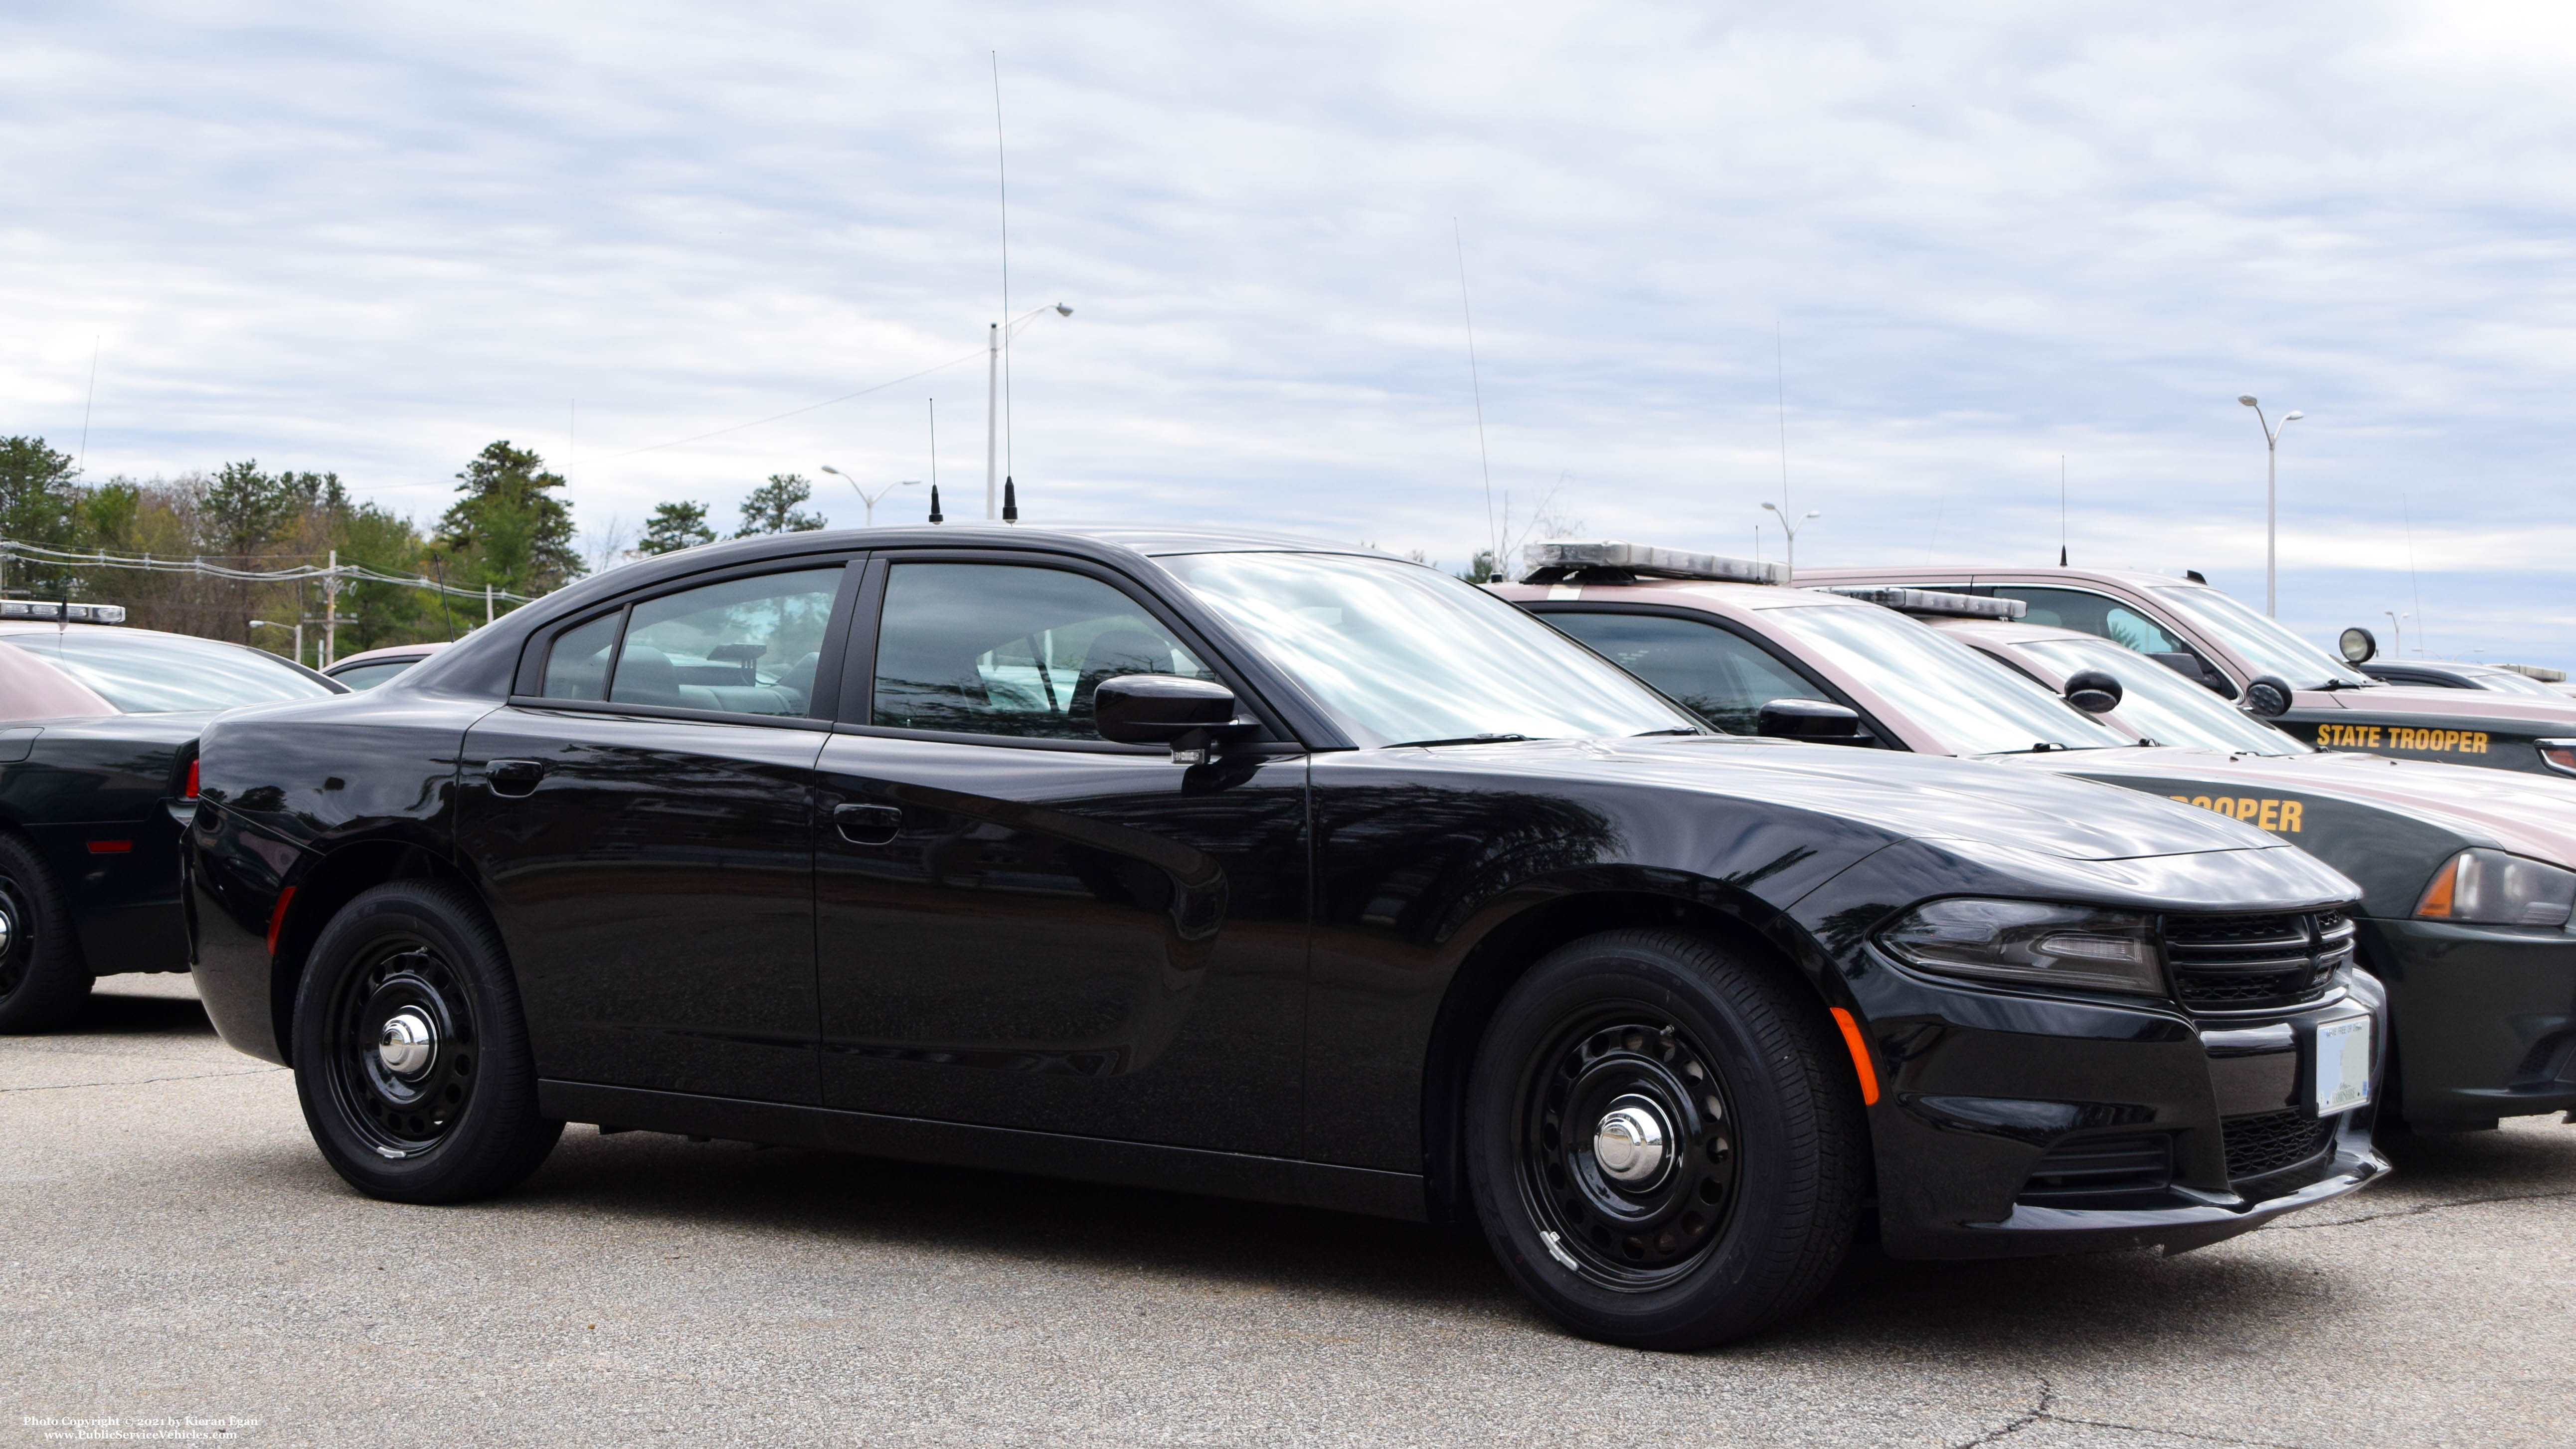 A photo  of New Hampshire State Police
            Unmarked Unit, a 2020 Dodge Charger             taken by Kieran Egan